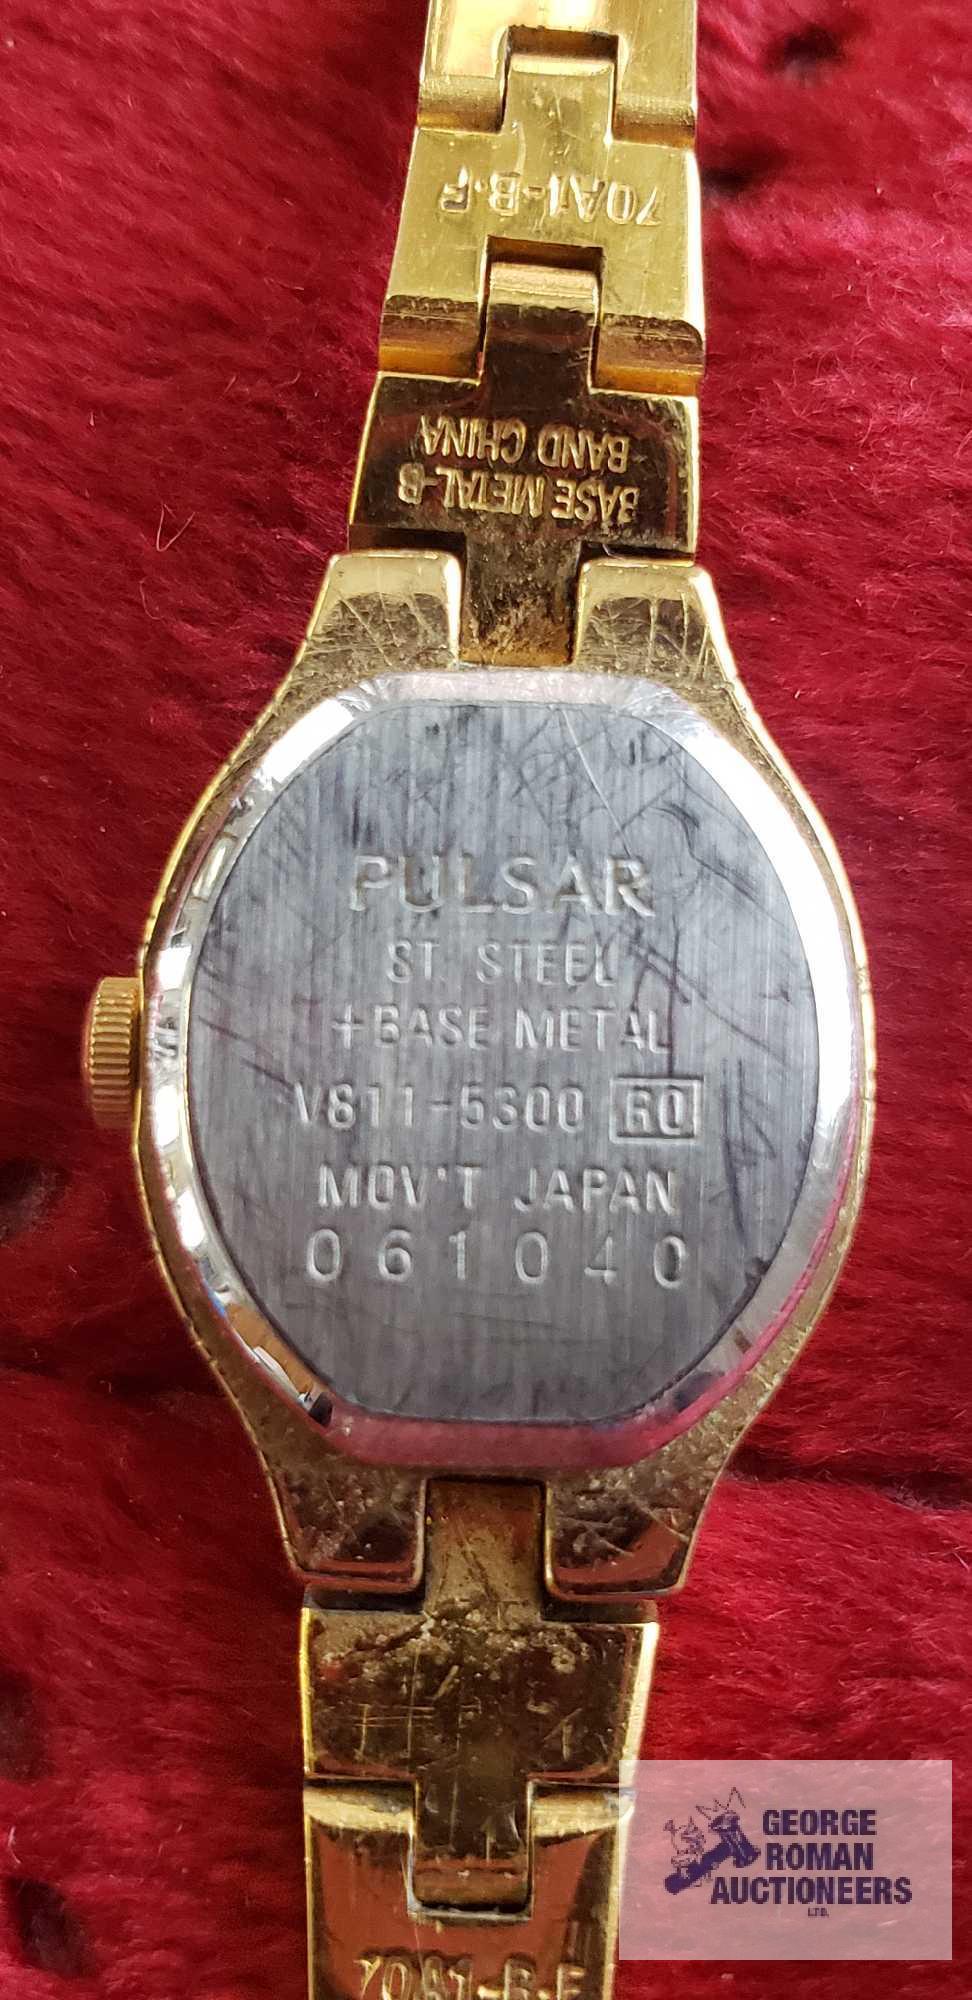 Three Pulsar watches, one missing clasp